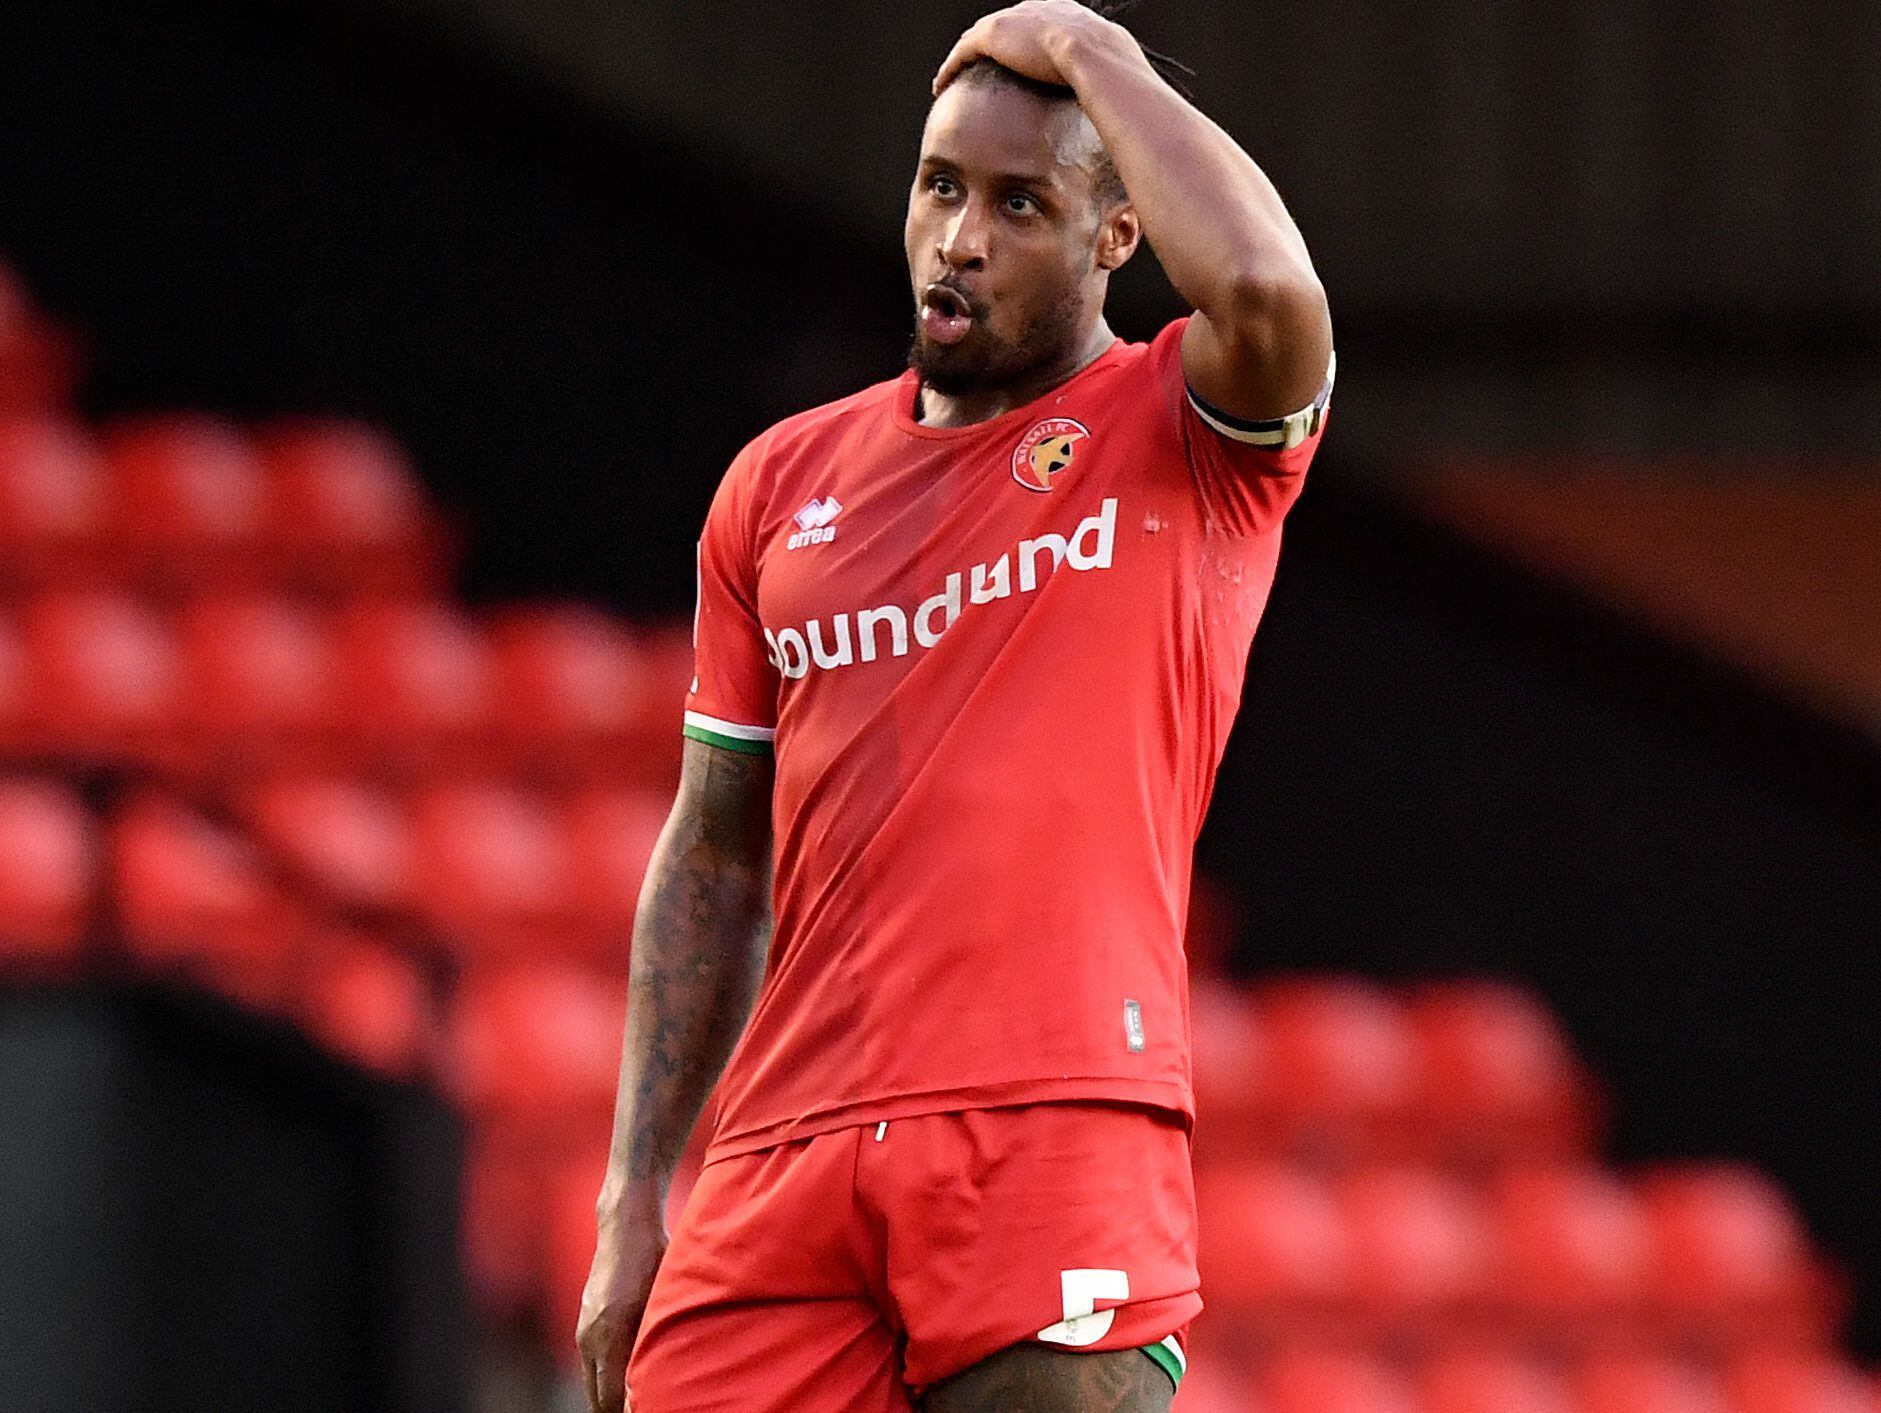 Walsall v Accrington Stanley: Who's out and who's a doubt